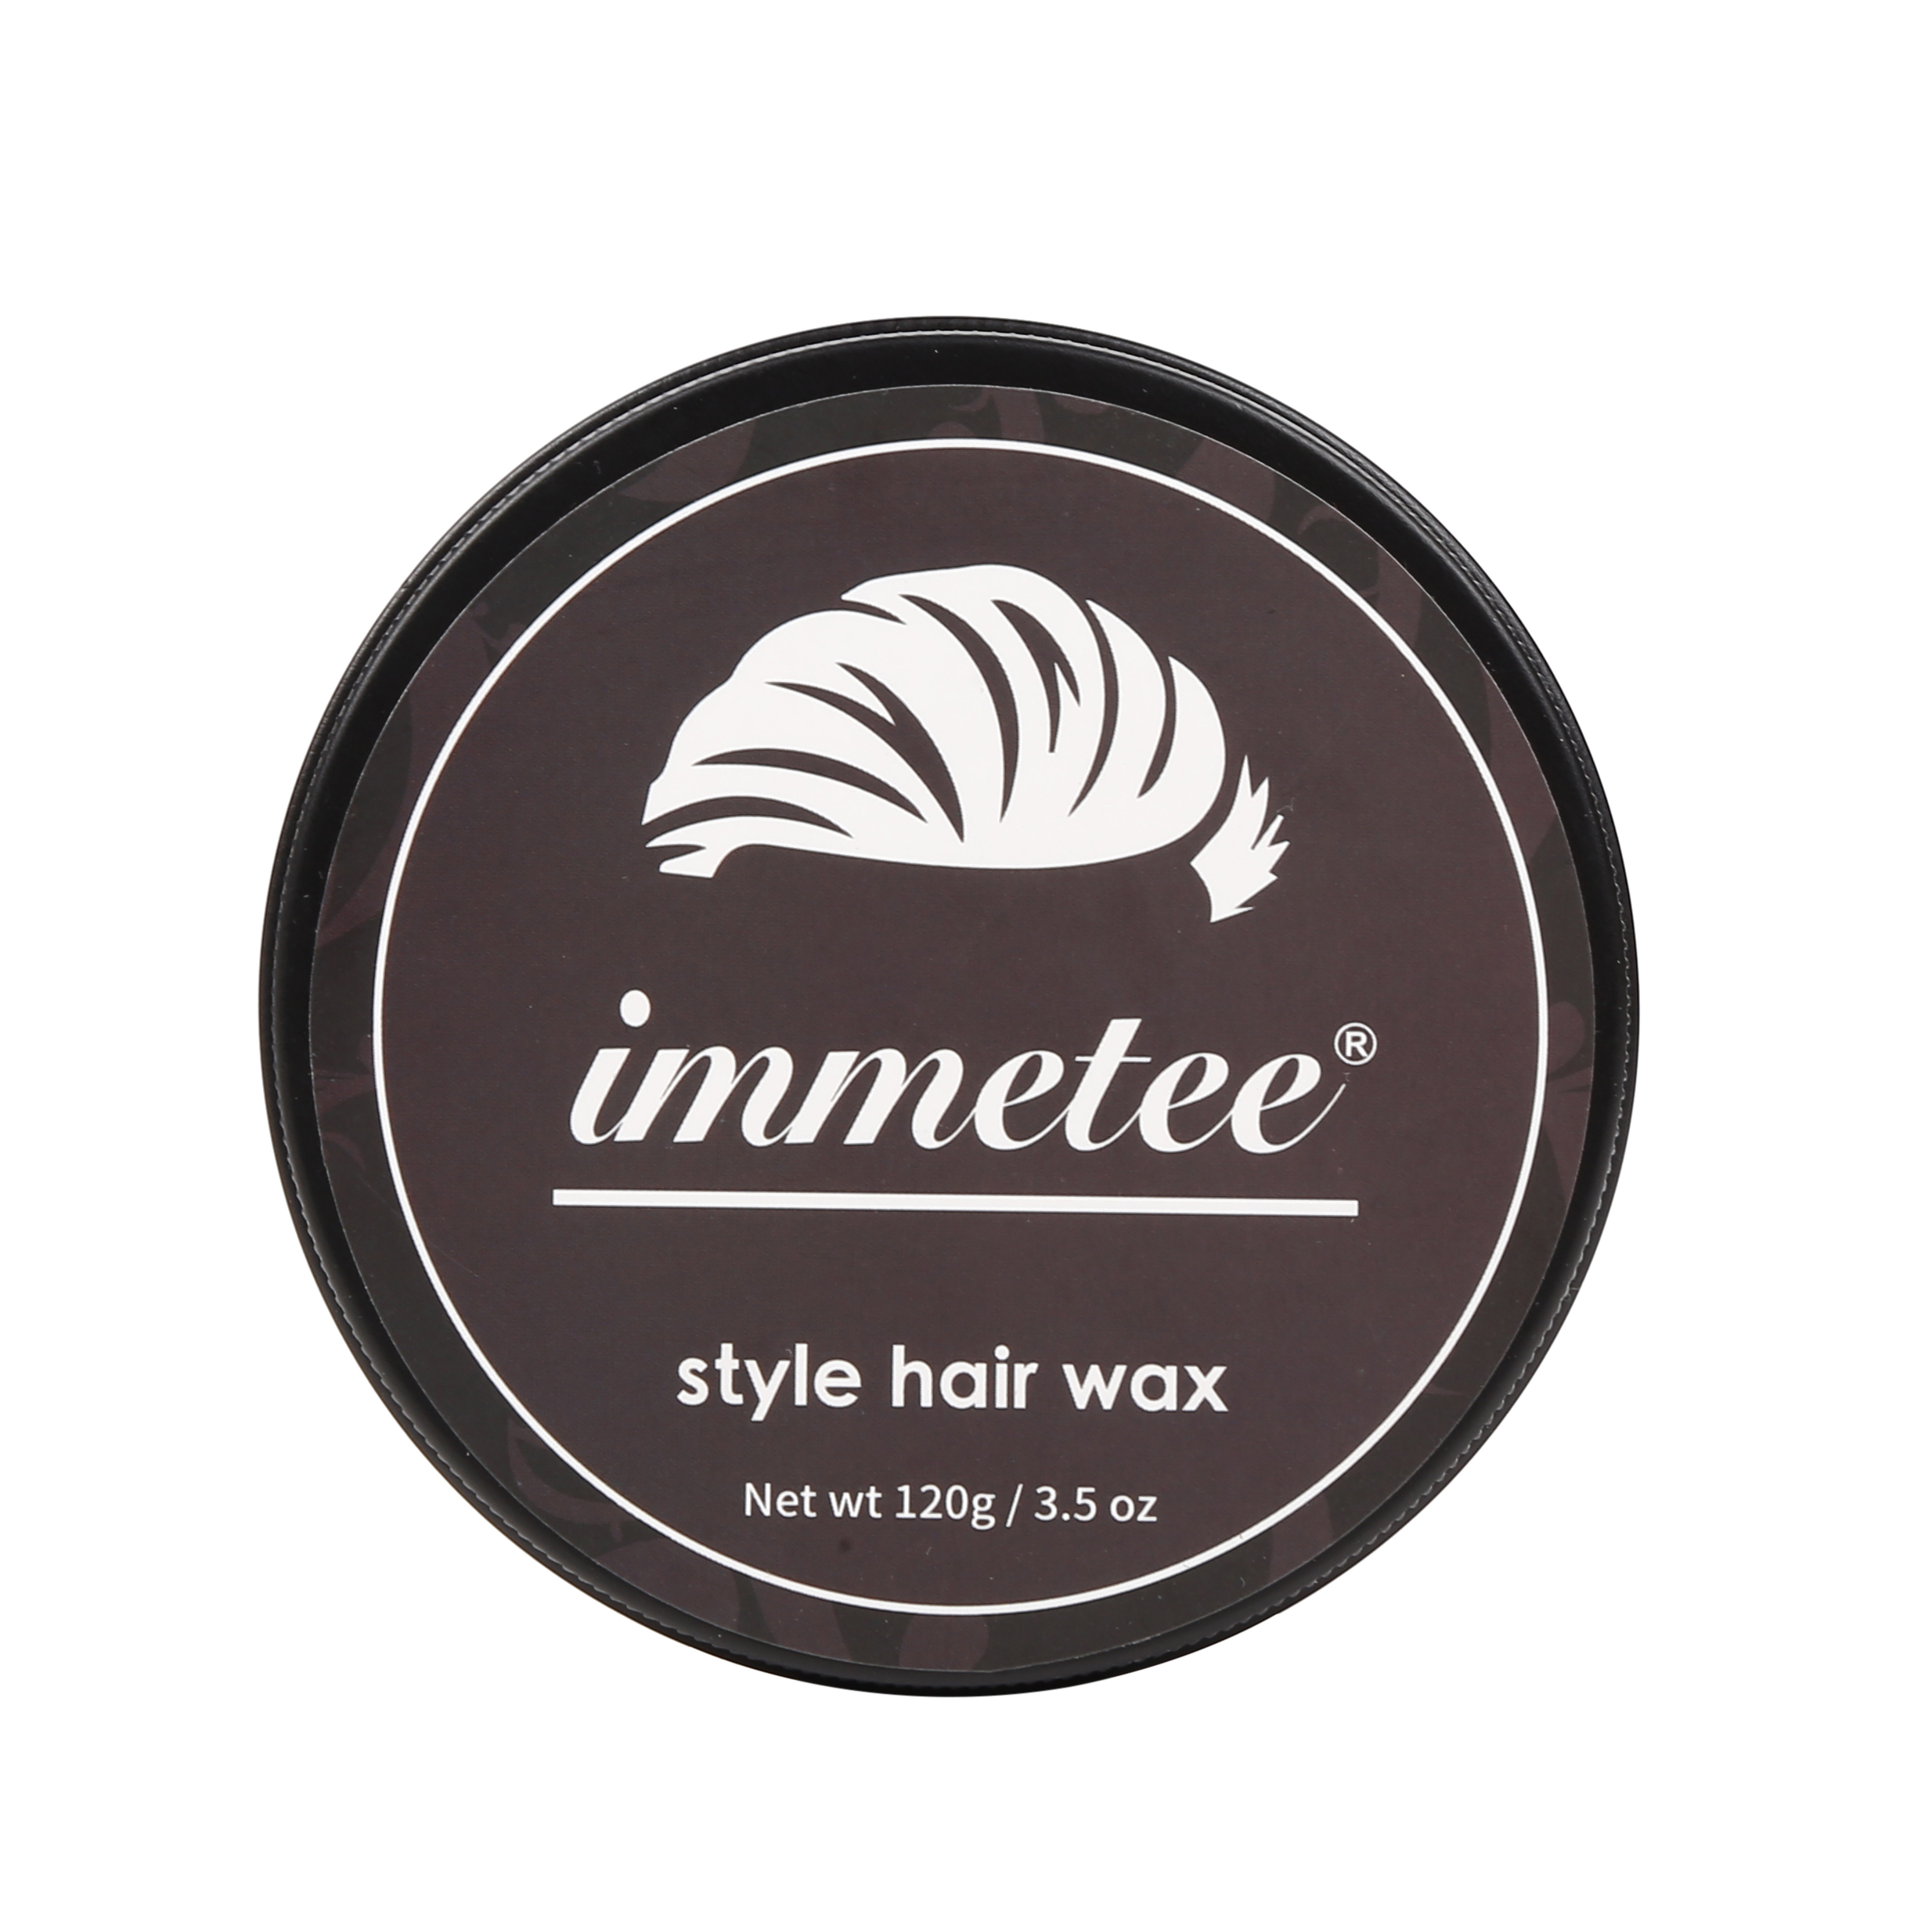 IMMETEE New Product Hair Color Wax For Men&Women Hair Styling Brown 120g*2